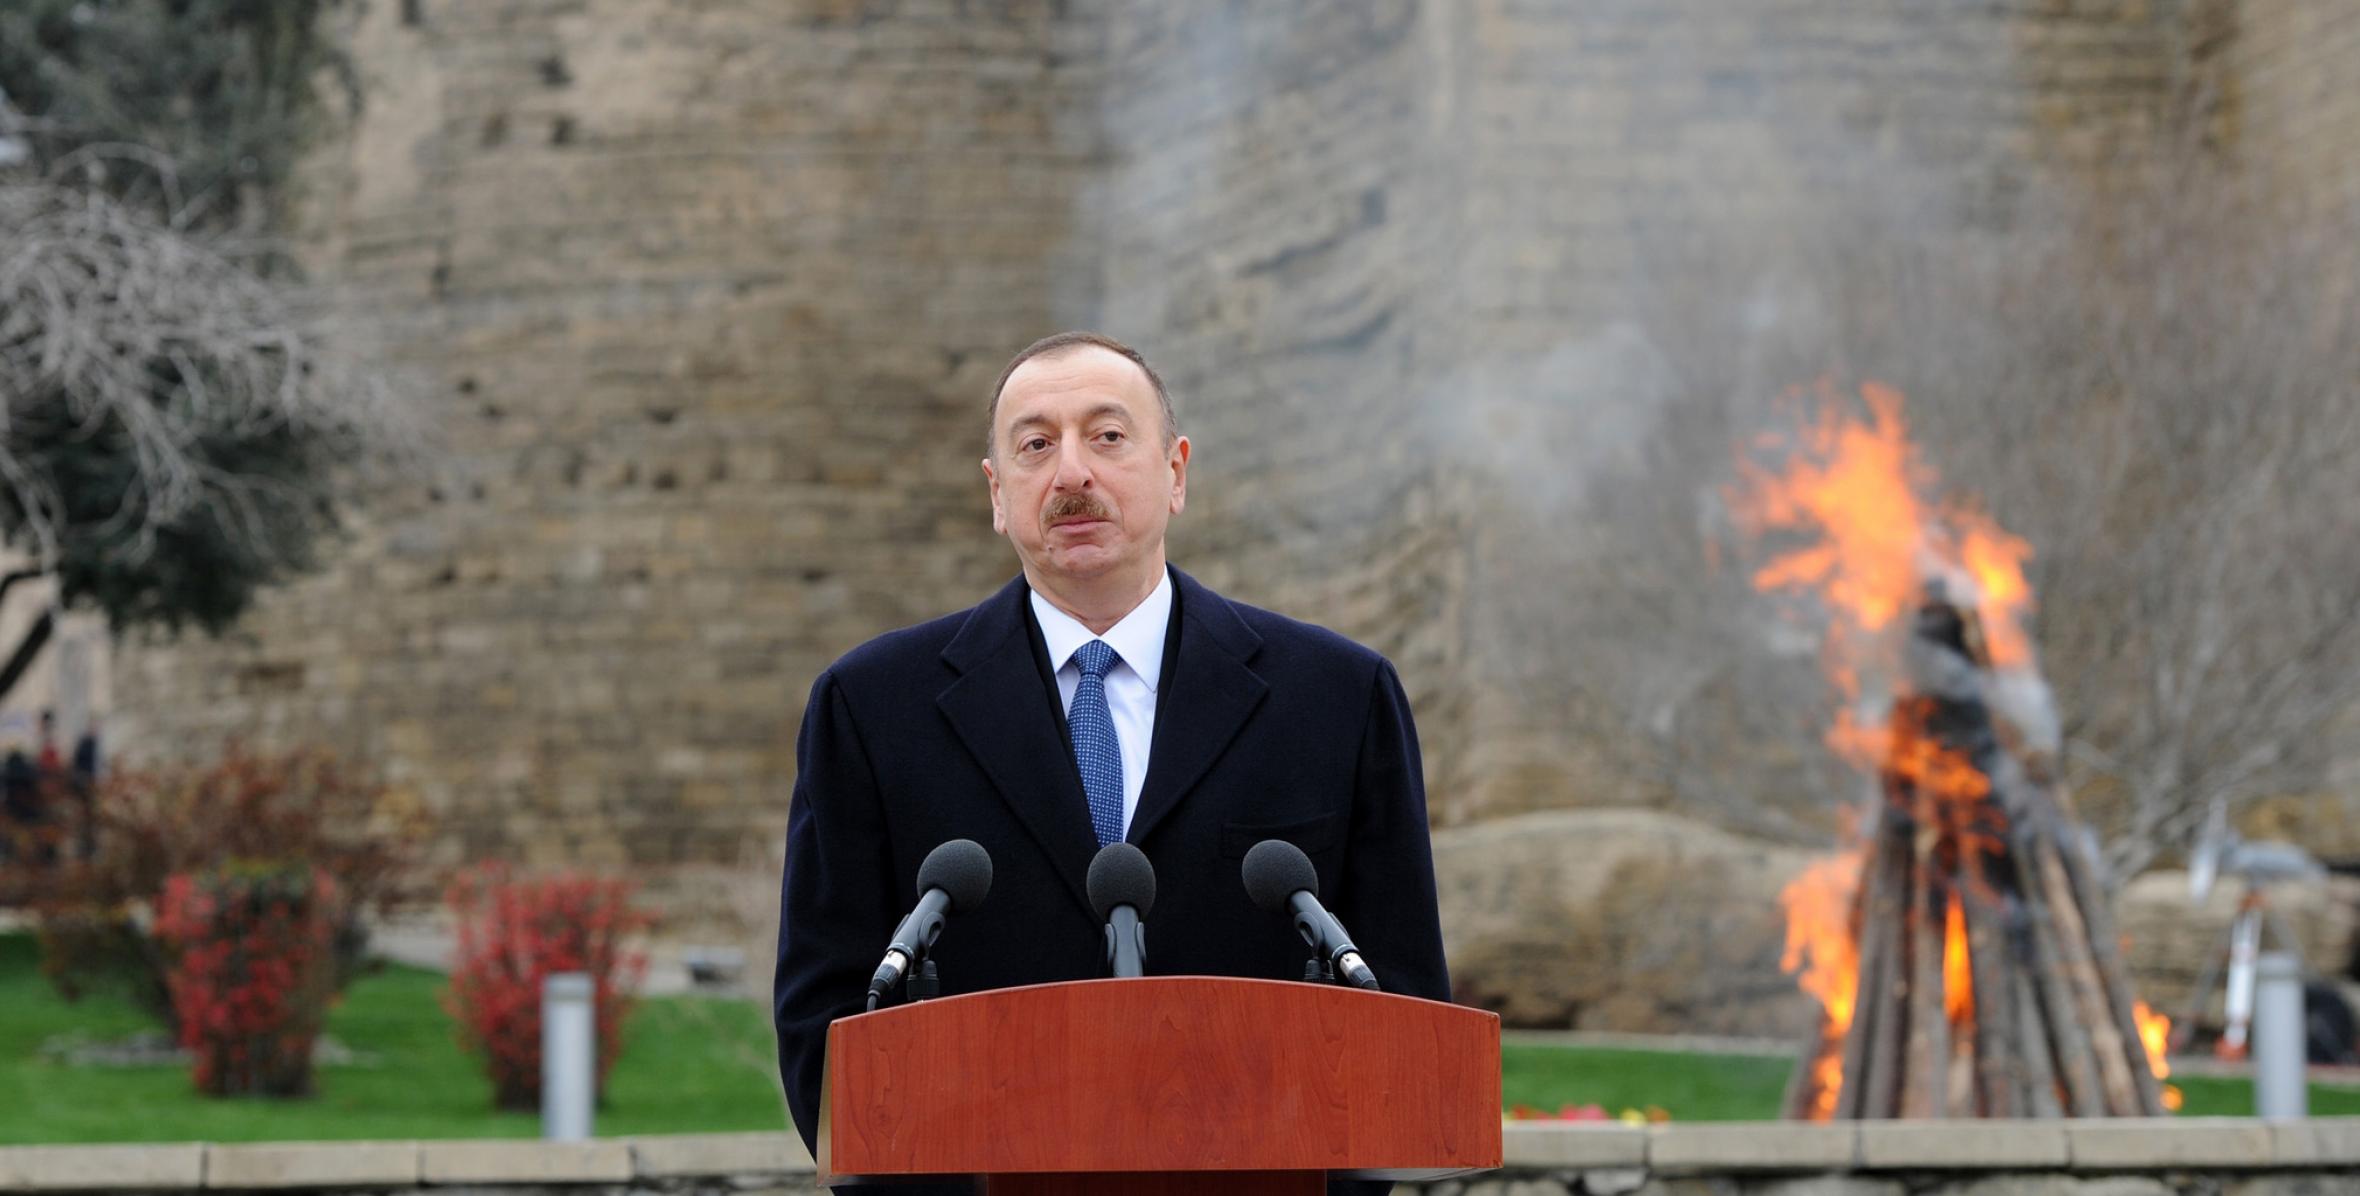 Speech by Ilham Aliyev at the nationwide festivities on the occasion of Novruz holiday